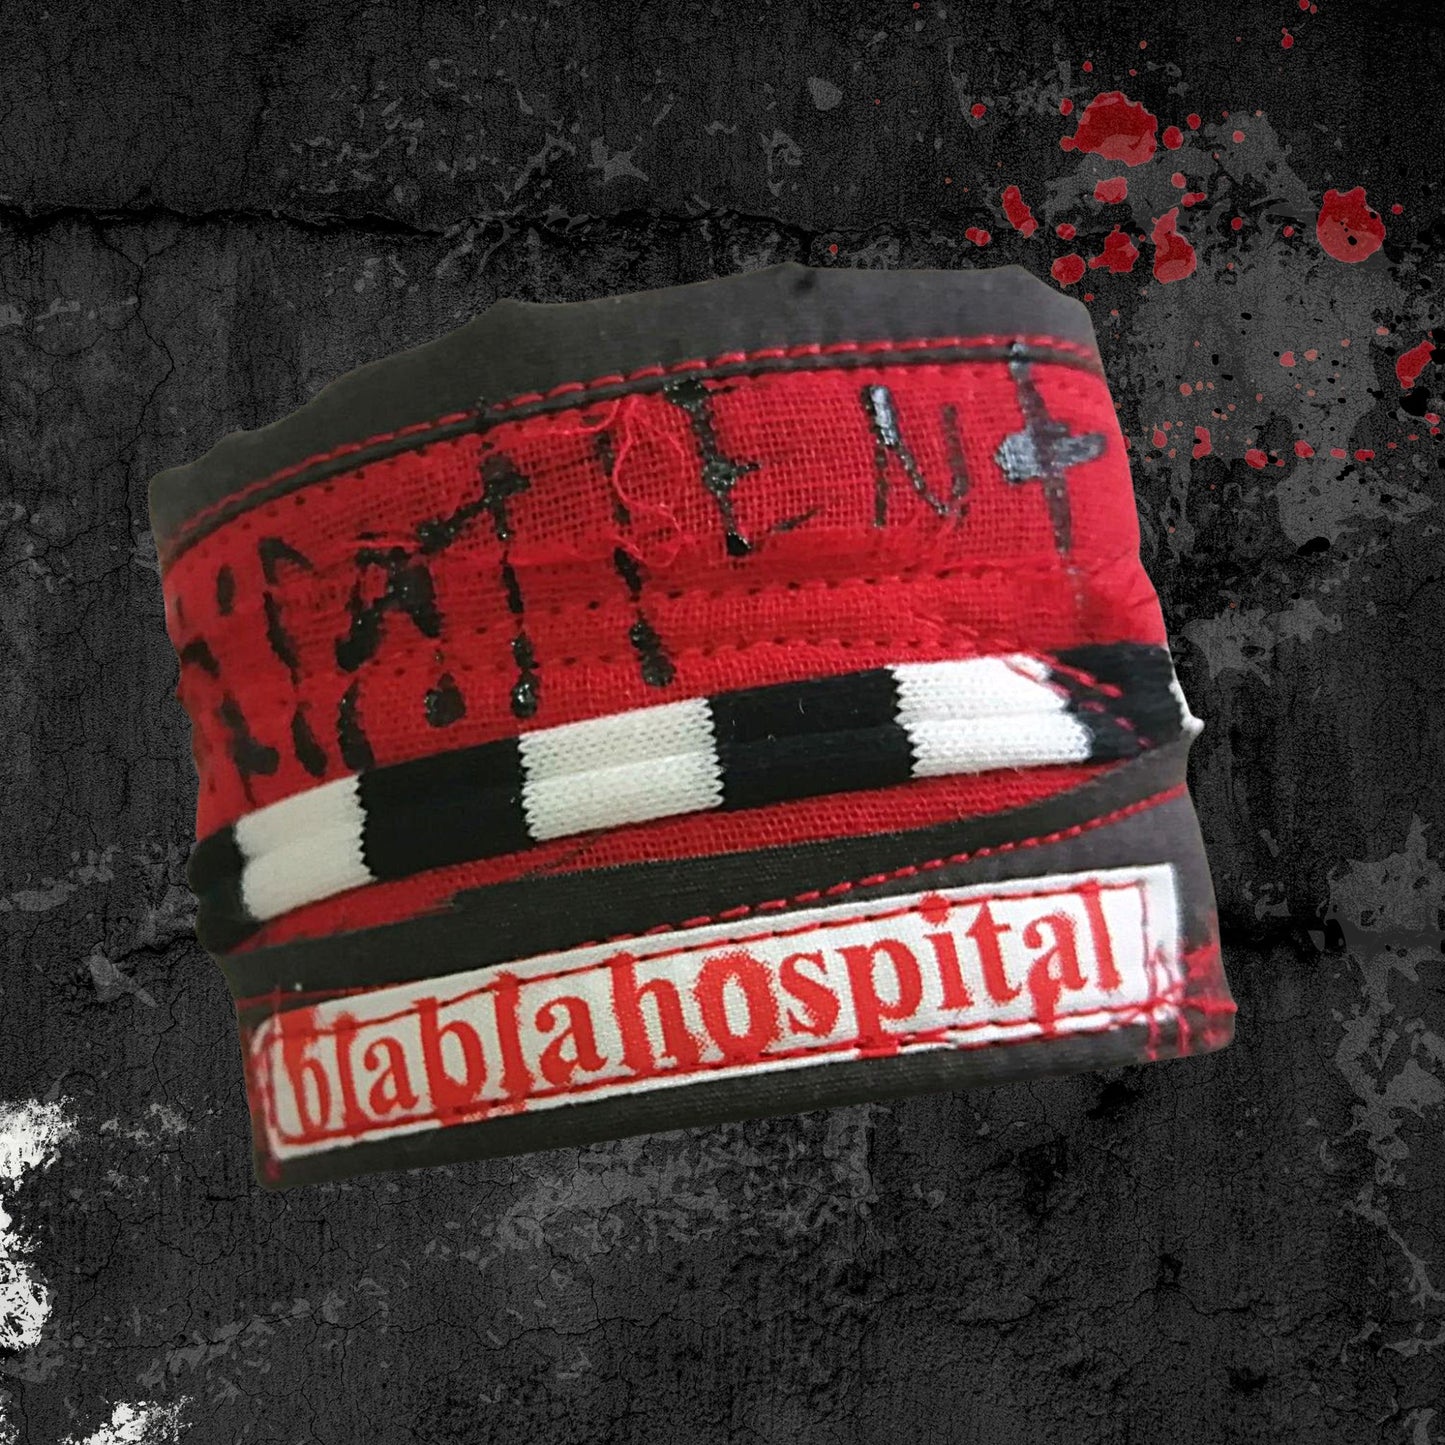 Blabla Patient wristband Gray and Red design / Paint one by one by Blabla punk fashion nurse! Don't get lost at my fashion hospital!